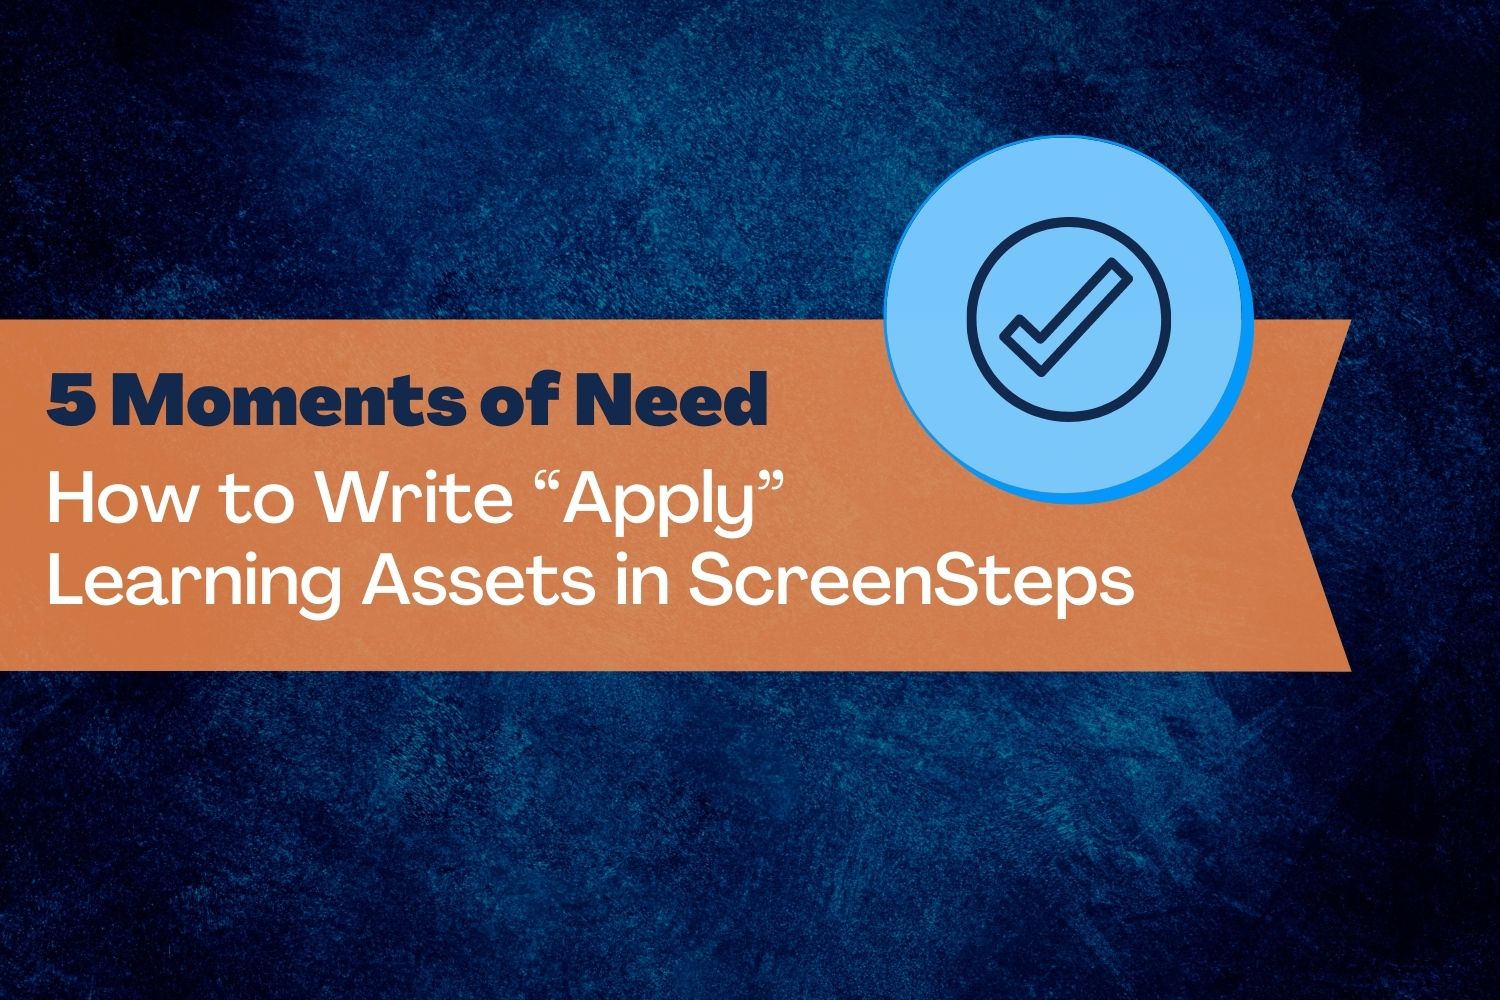 5 Moments of Need: How to Write “Apply” Learning Assets in ScreenSteps